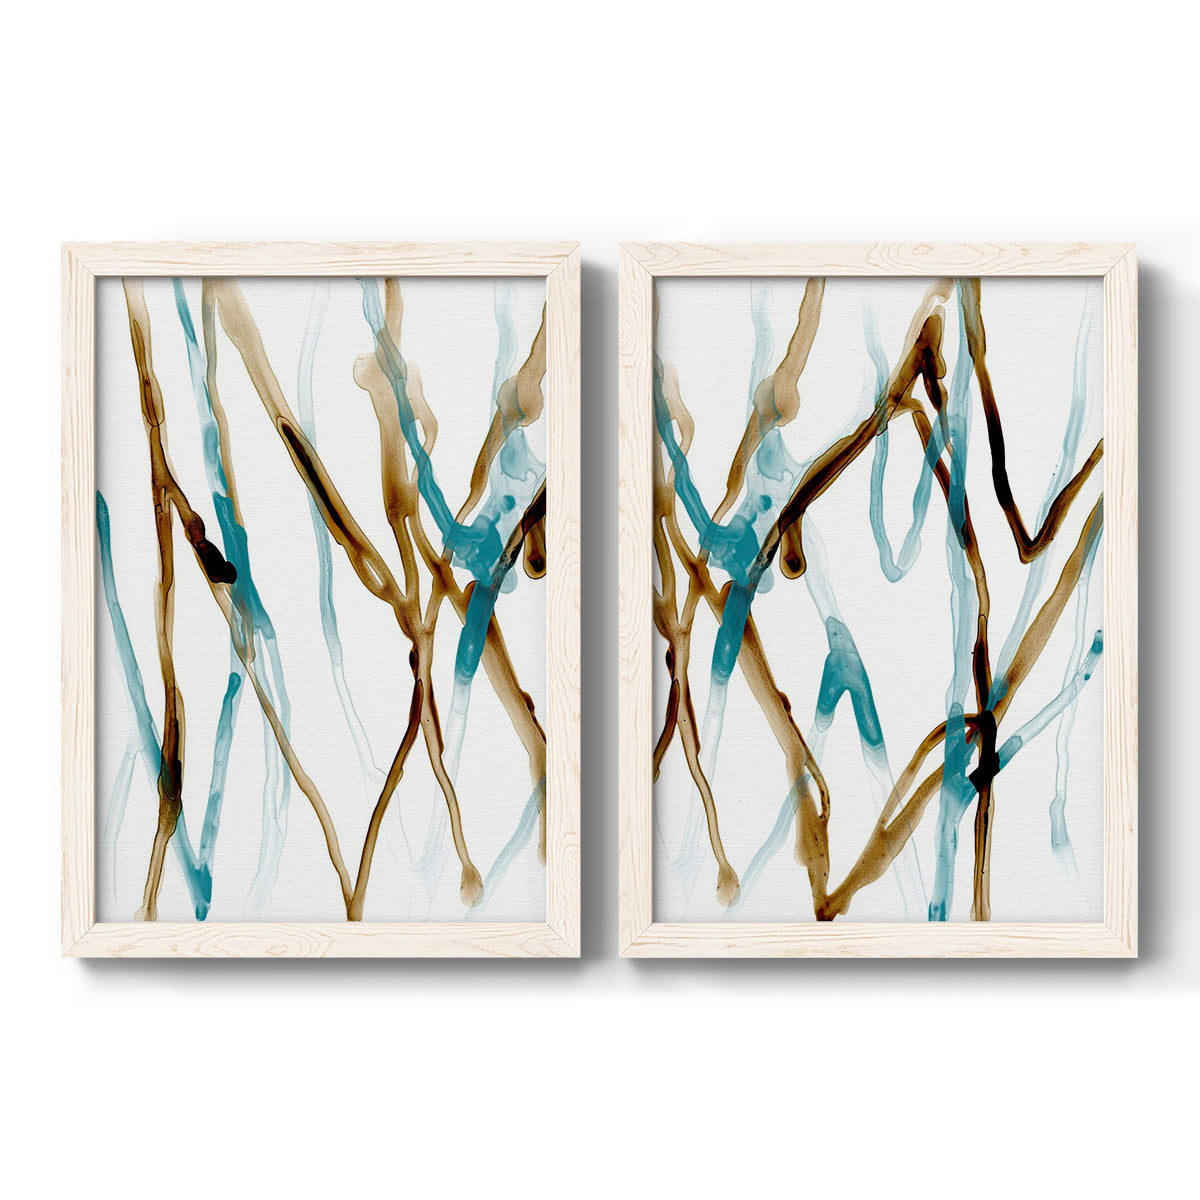 Runnel XVII - Premium Framed Canvas 2 Piece Set - Ready to Hang